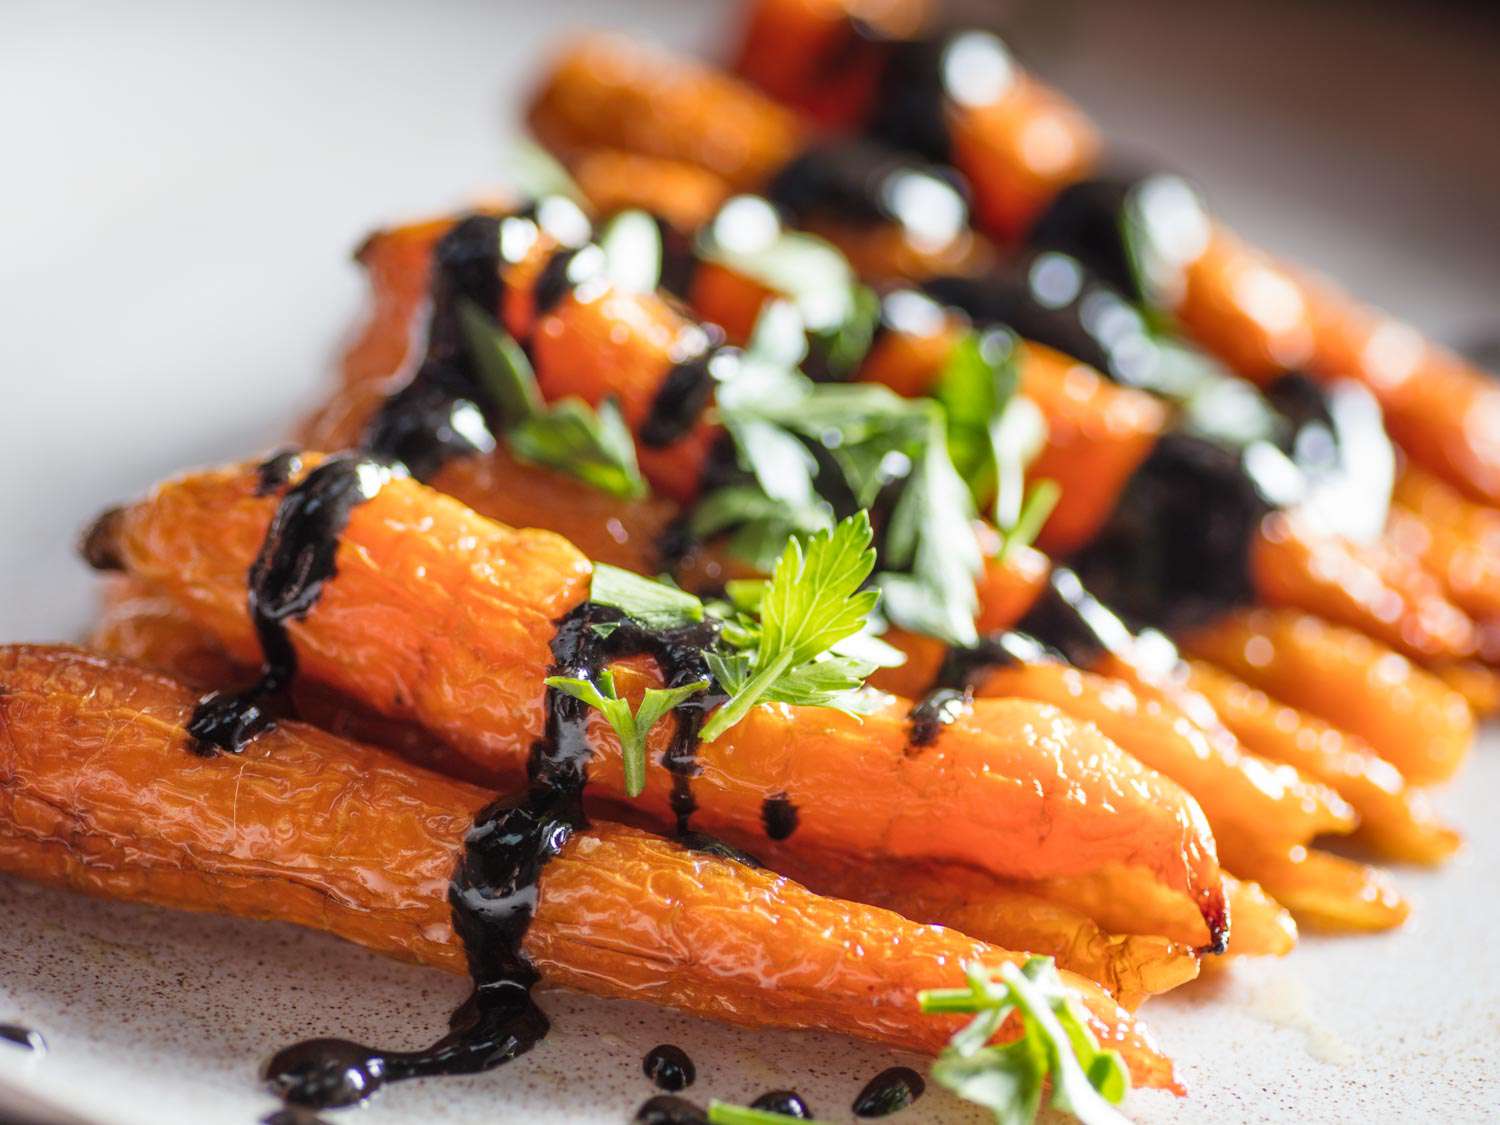 Closeup of roasted carrots drizzled with black sesame dressing and garnished with parsley leaves.